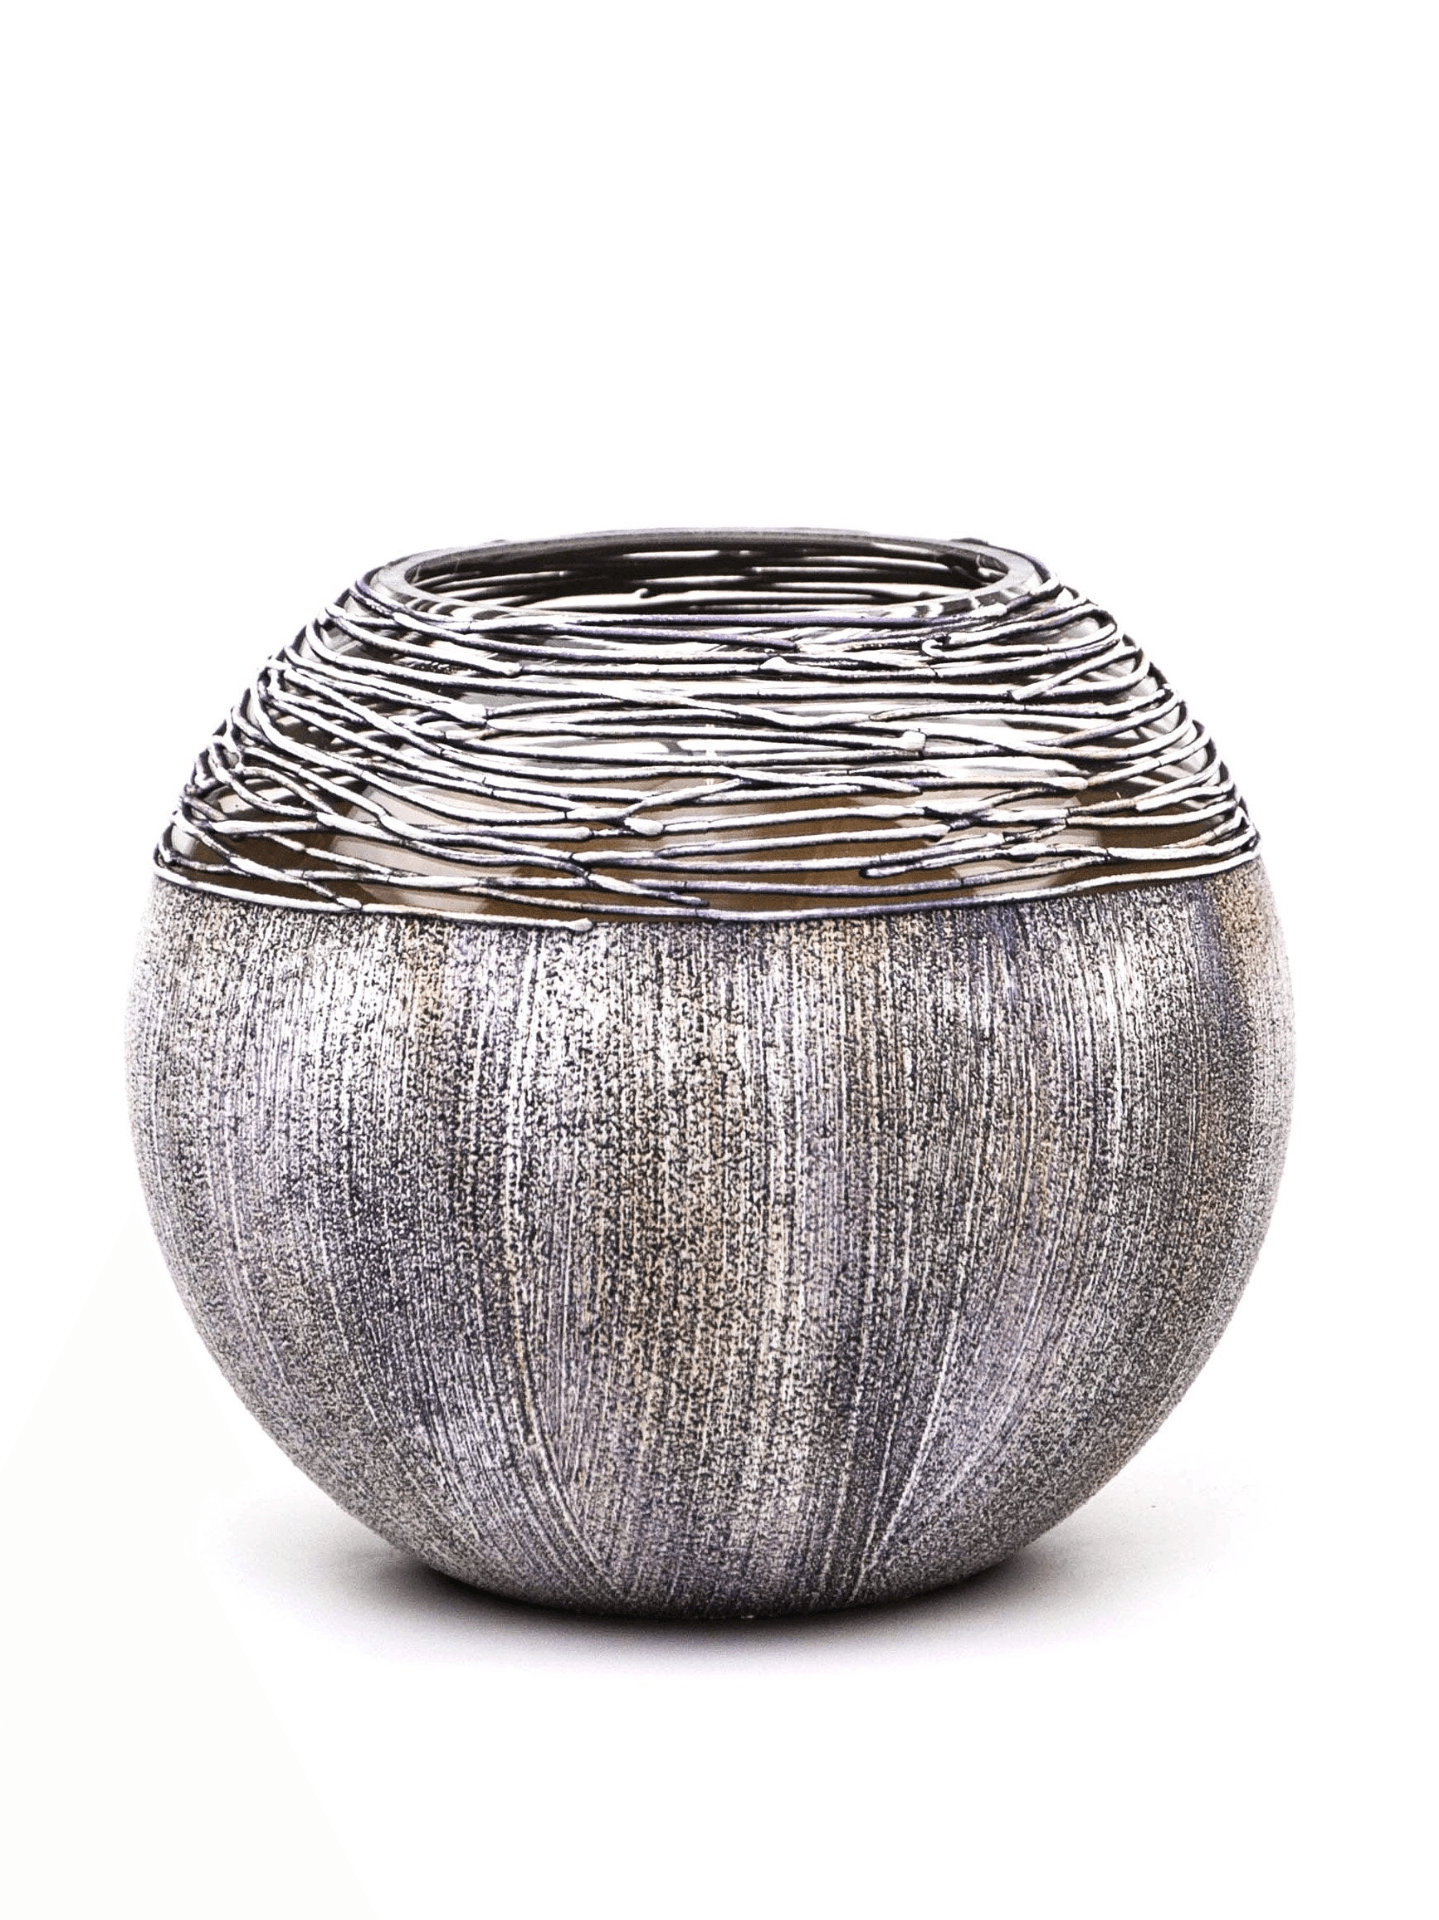 Art Decorated Gray Glass Vase for Flowers | Painted Art Glass Round Vase | Interior Design Home Room Decor | Table vase 6 inch | 5578/180/sh228  